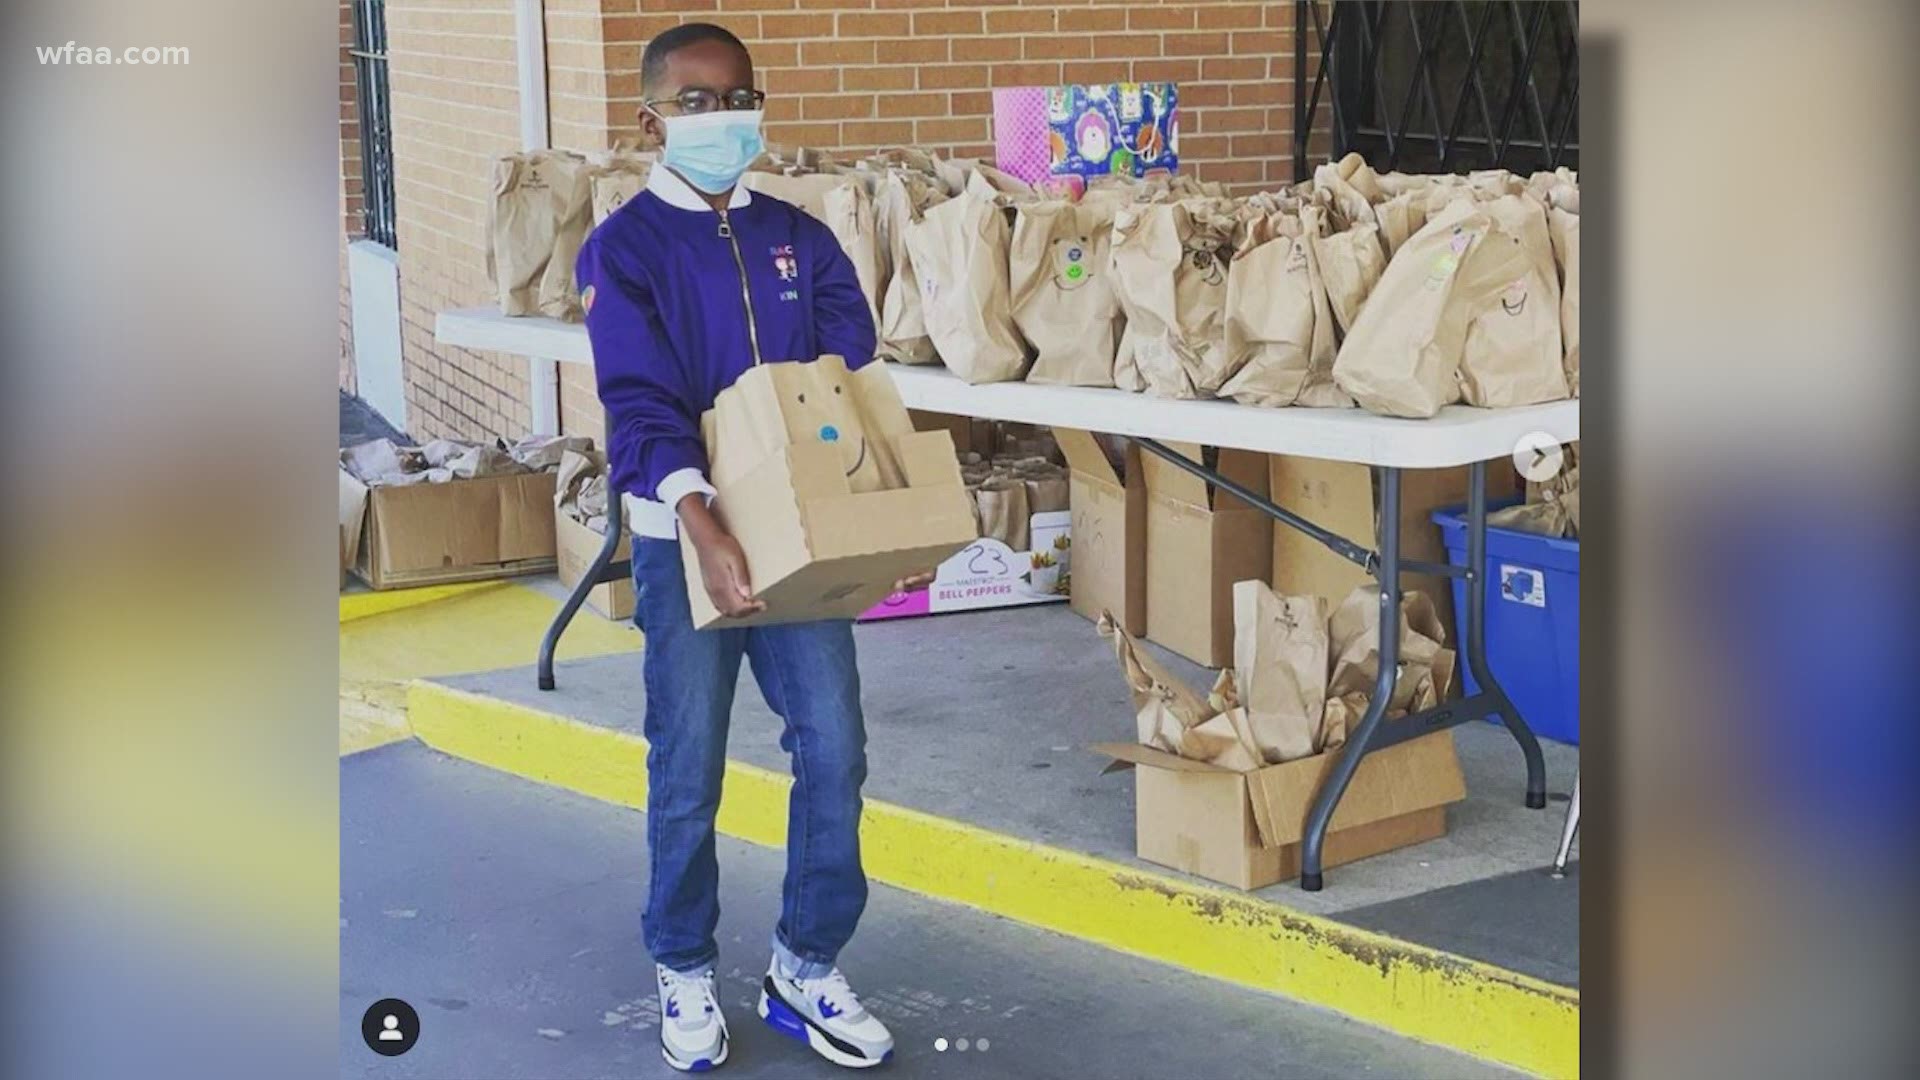 As of Friday, Nov. 13 Orion Jean had collected 42,523 meals.